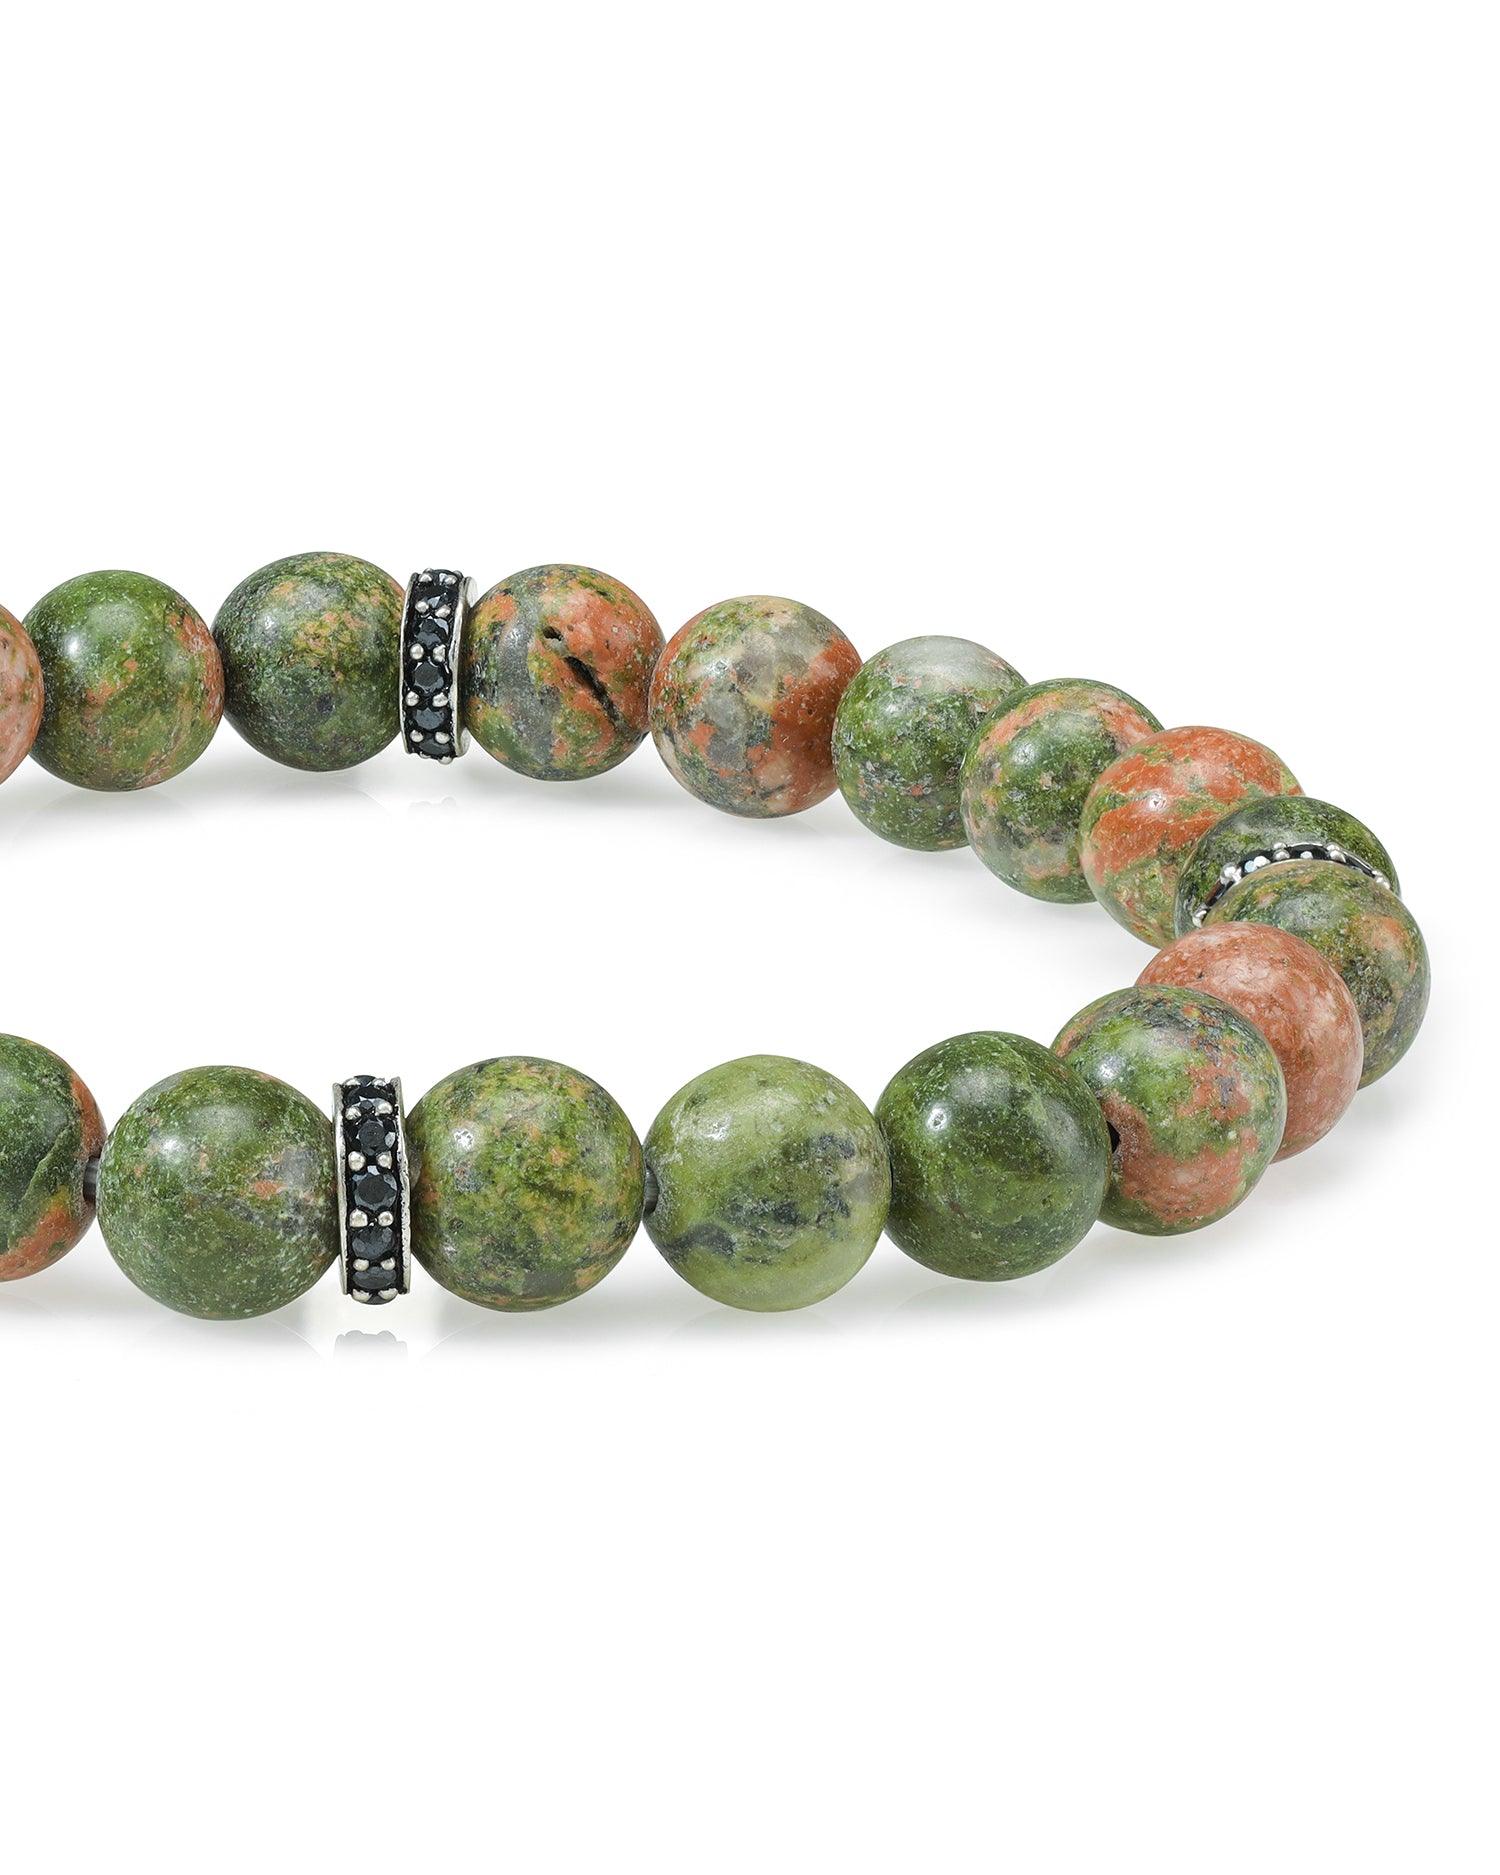 Unakite Black Spinel 925 Sterling Silver Stretchable Beads Bracelet 7" For Men's Jewelry - YoTreasure